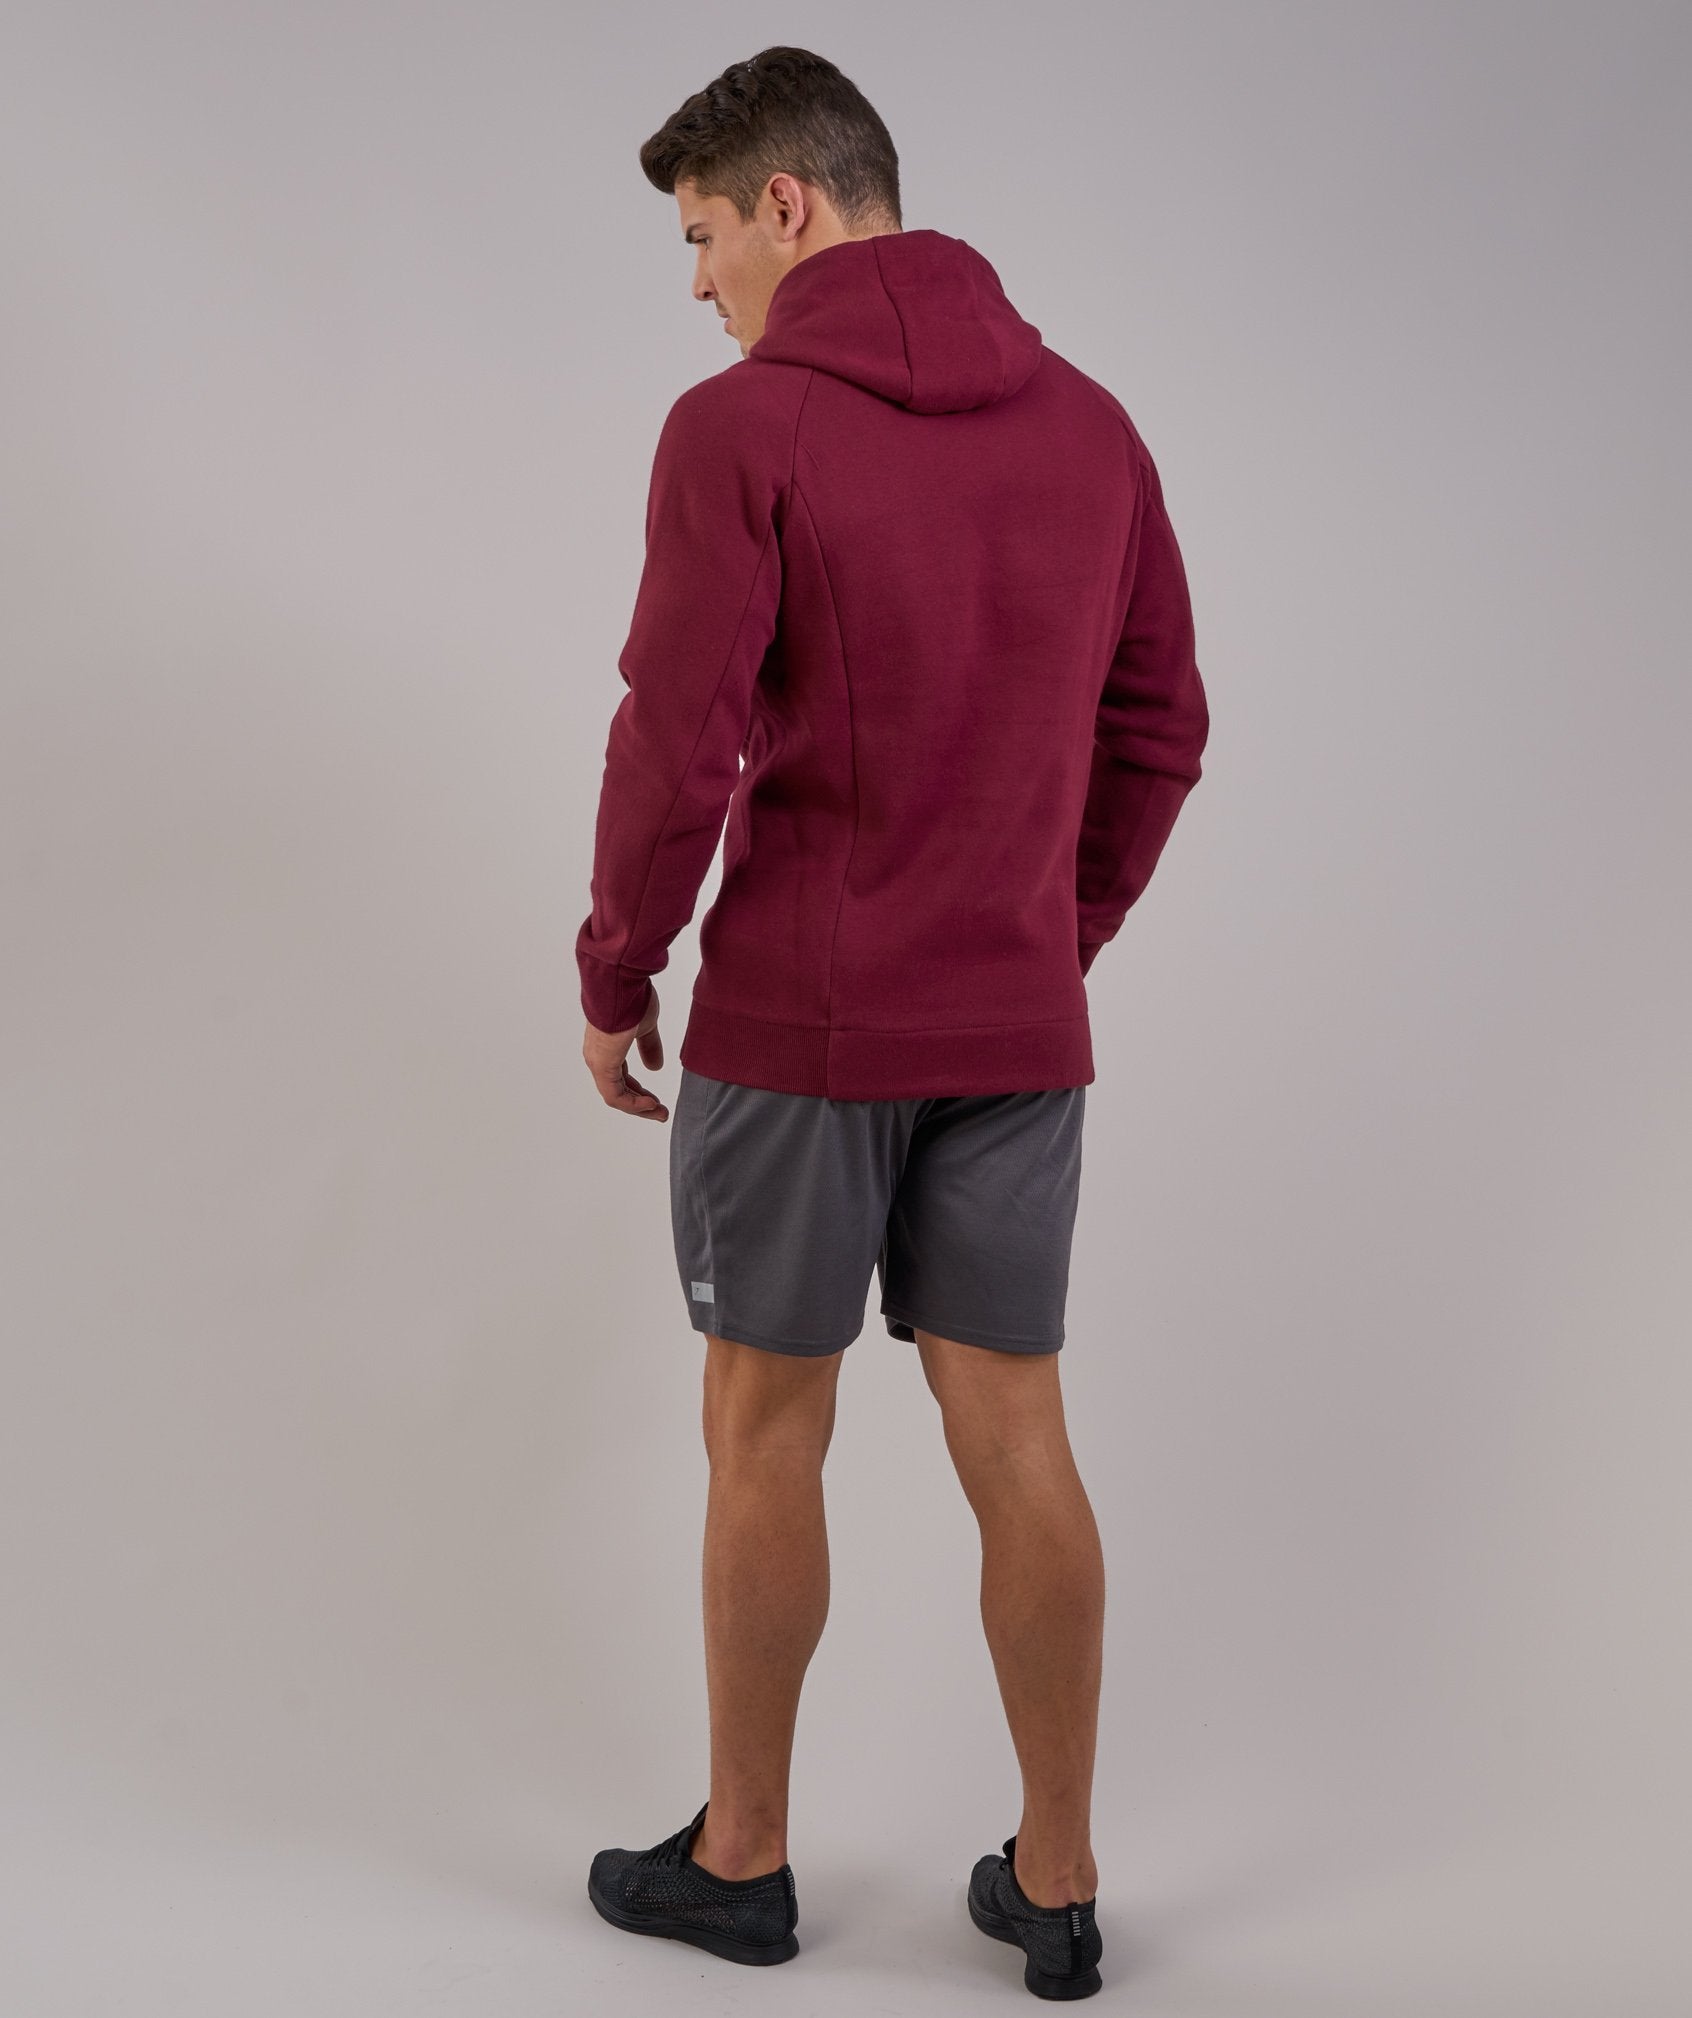 Oversized Hoodie in Port - view 4